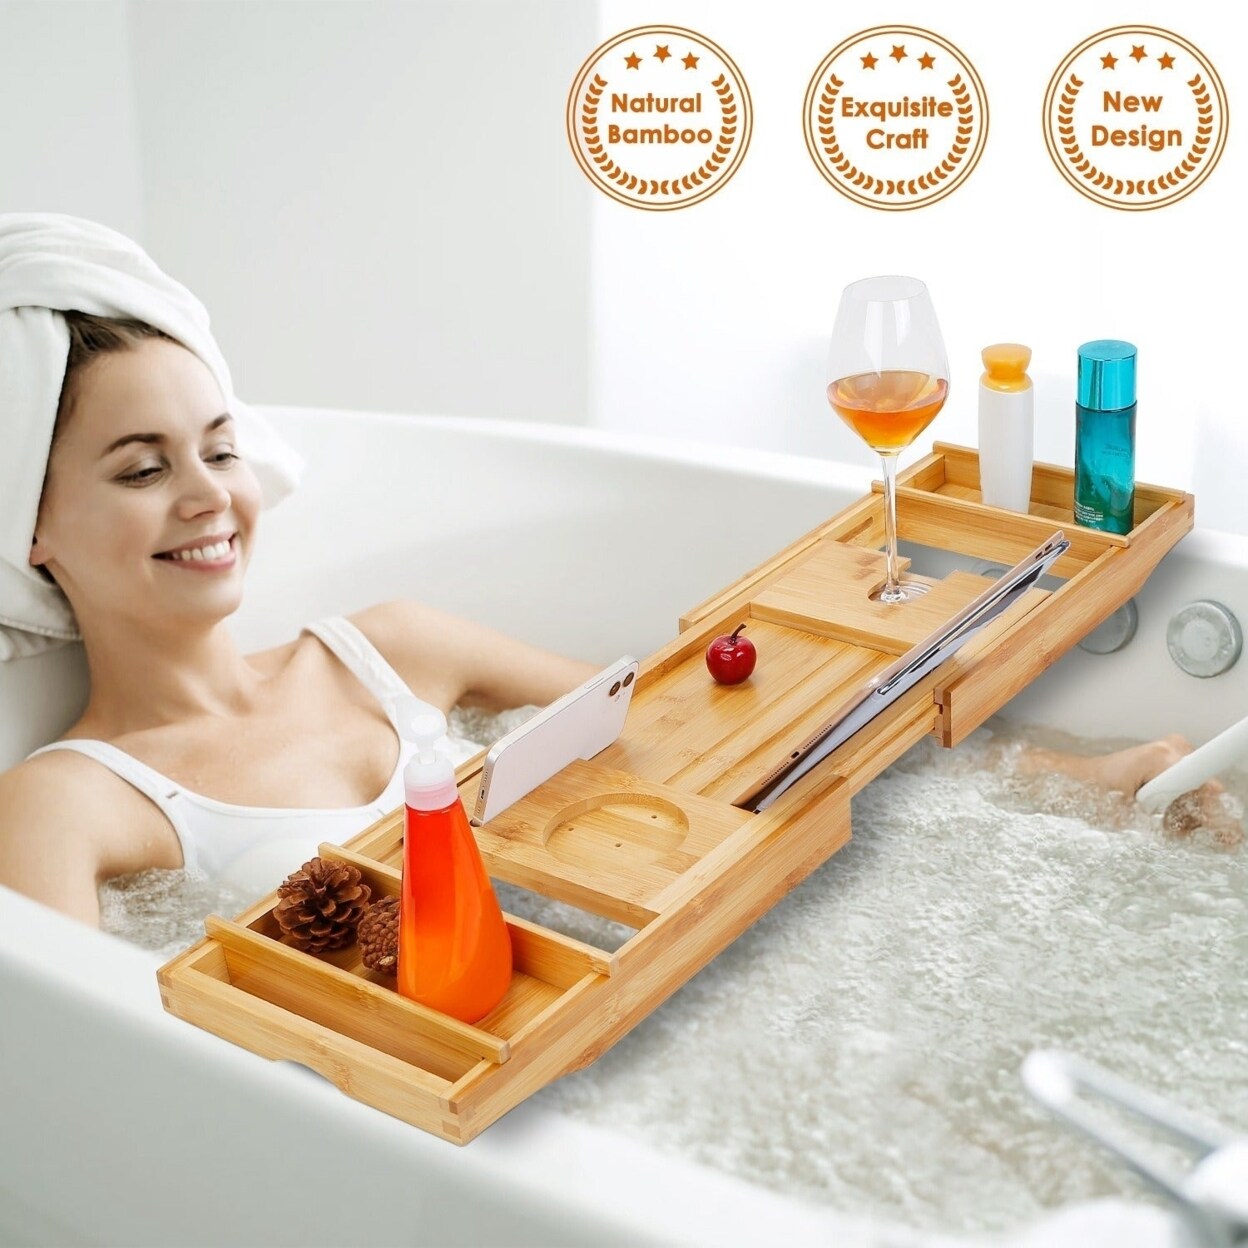 SKUSHOPS Bathtub Caddy Tray Crafted Bamboo Bath Tray Table Extendable Reading Rack Tablet Phone Holder